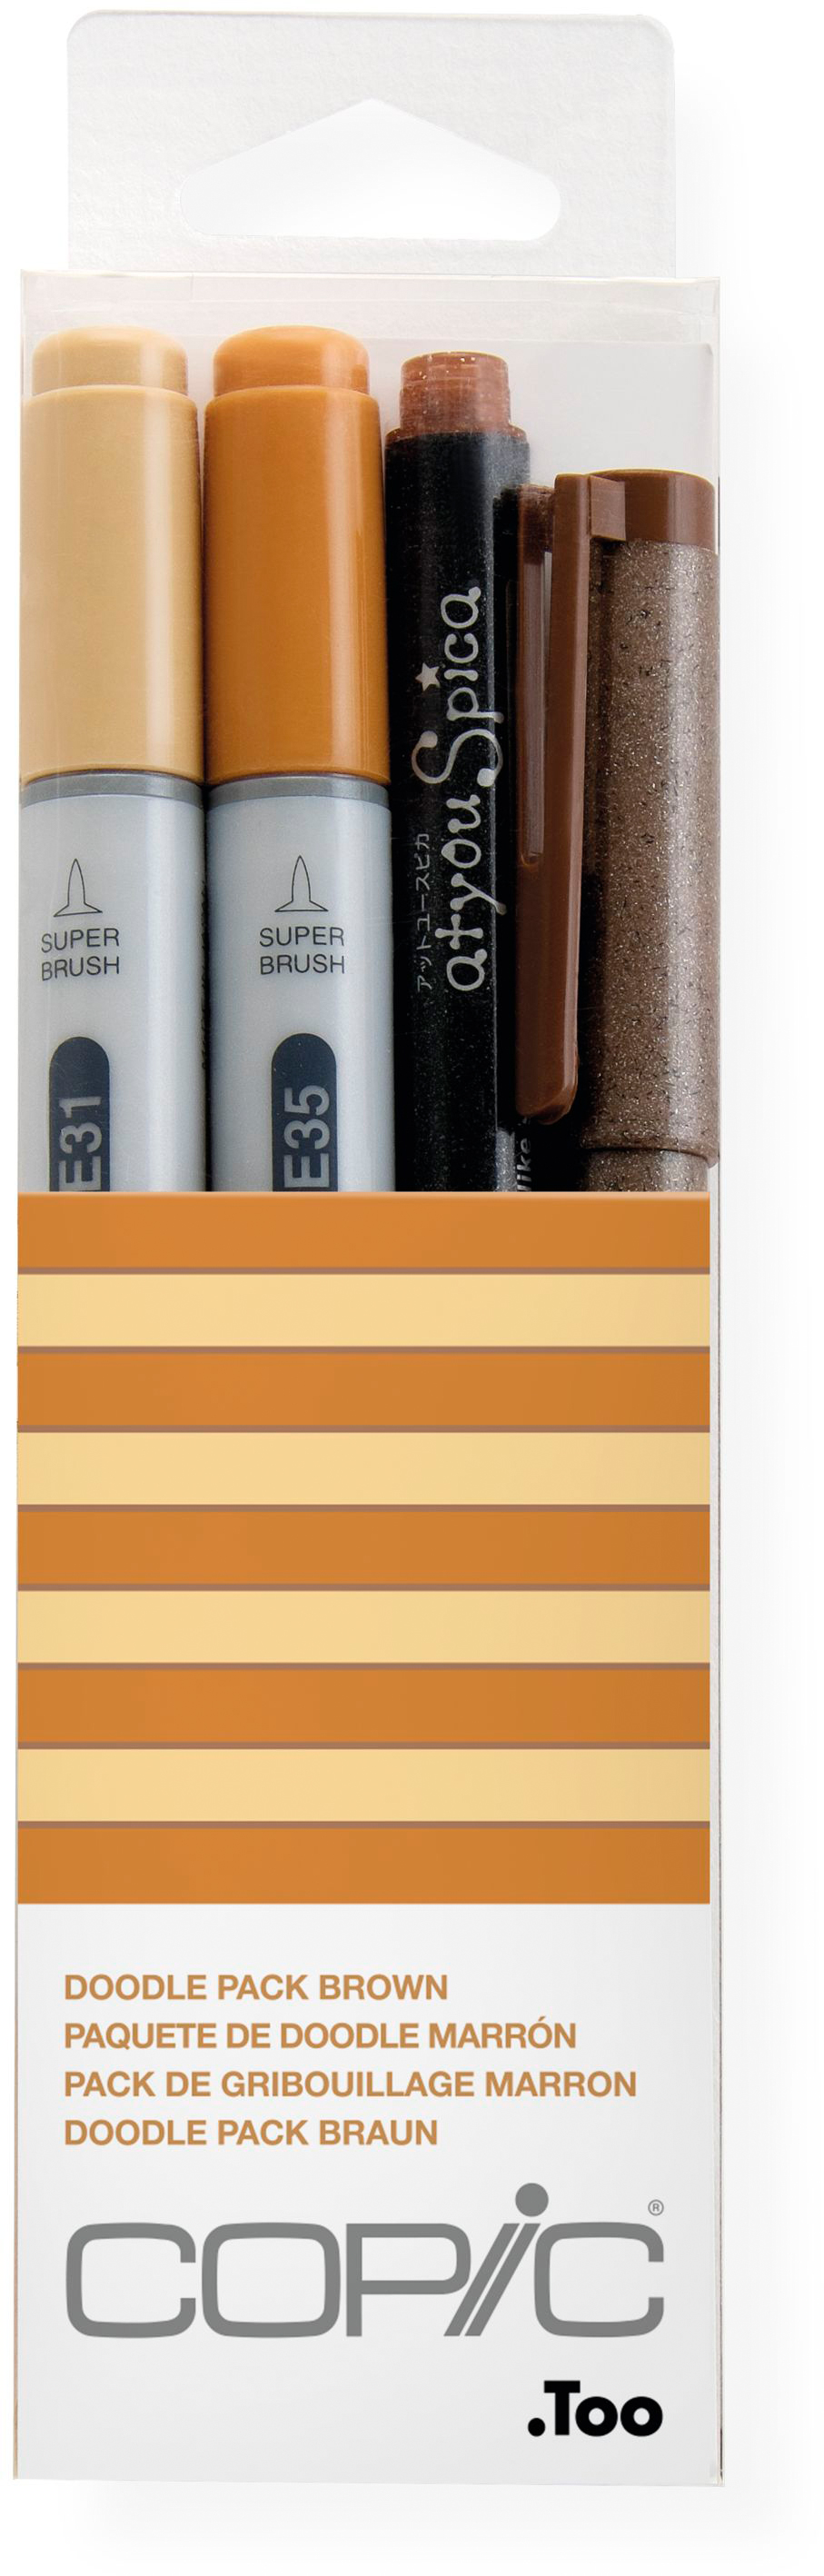 COPIC Marker Ciao 22075647 Doodle pack Brown, 4 pcs.